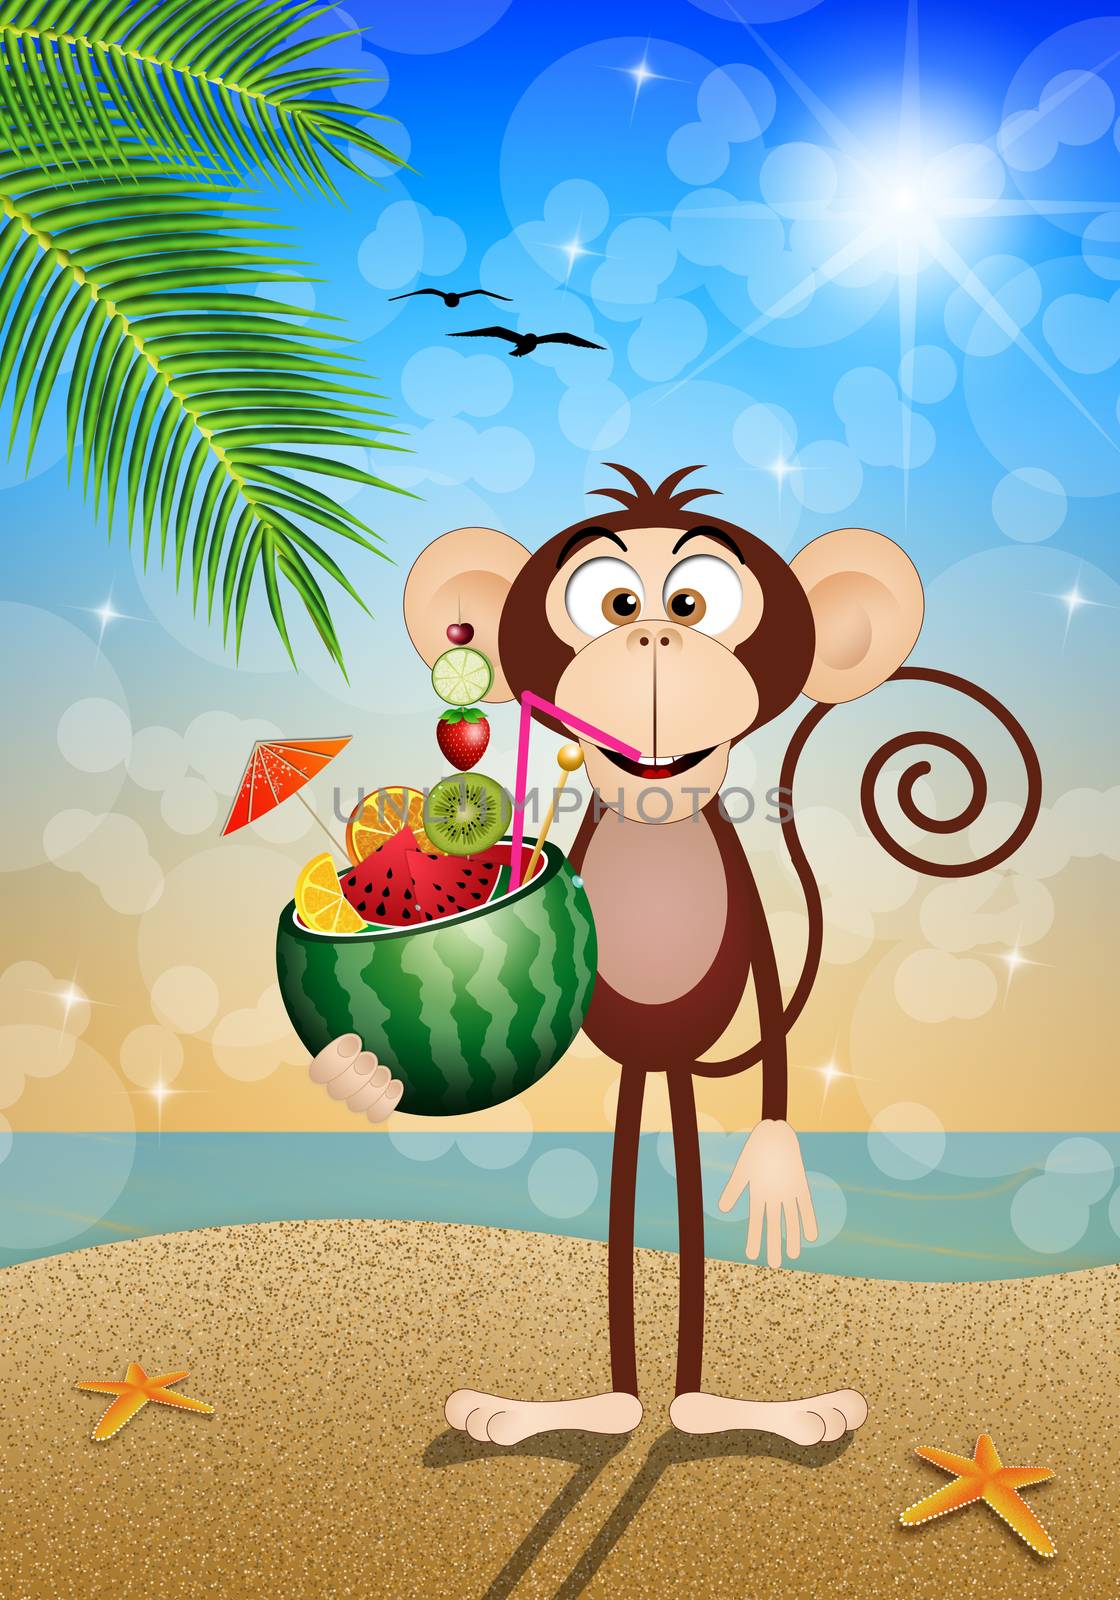 Monkey with watermelon on the beach by sognolucido